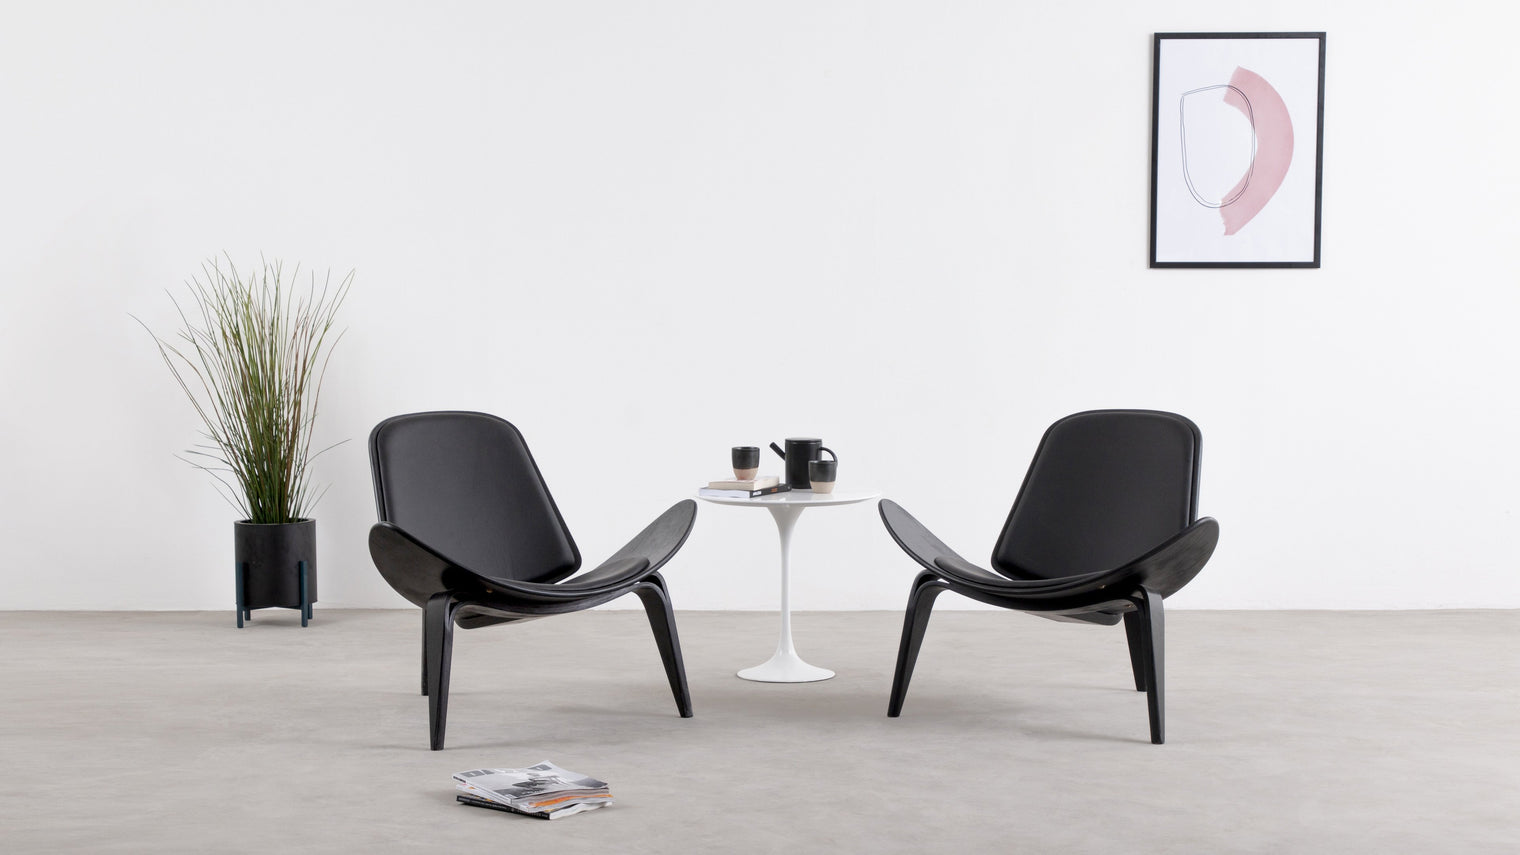 A unique design ahead of its time|The Shell Lounge Chair combines contemporary elements with a futuristic aesthetic. A trio of sleek, hardwearing legs serve as a base for the seemingly weightless, curved seat.
